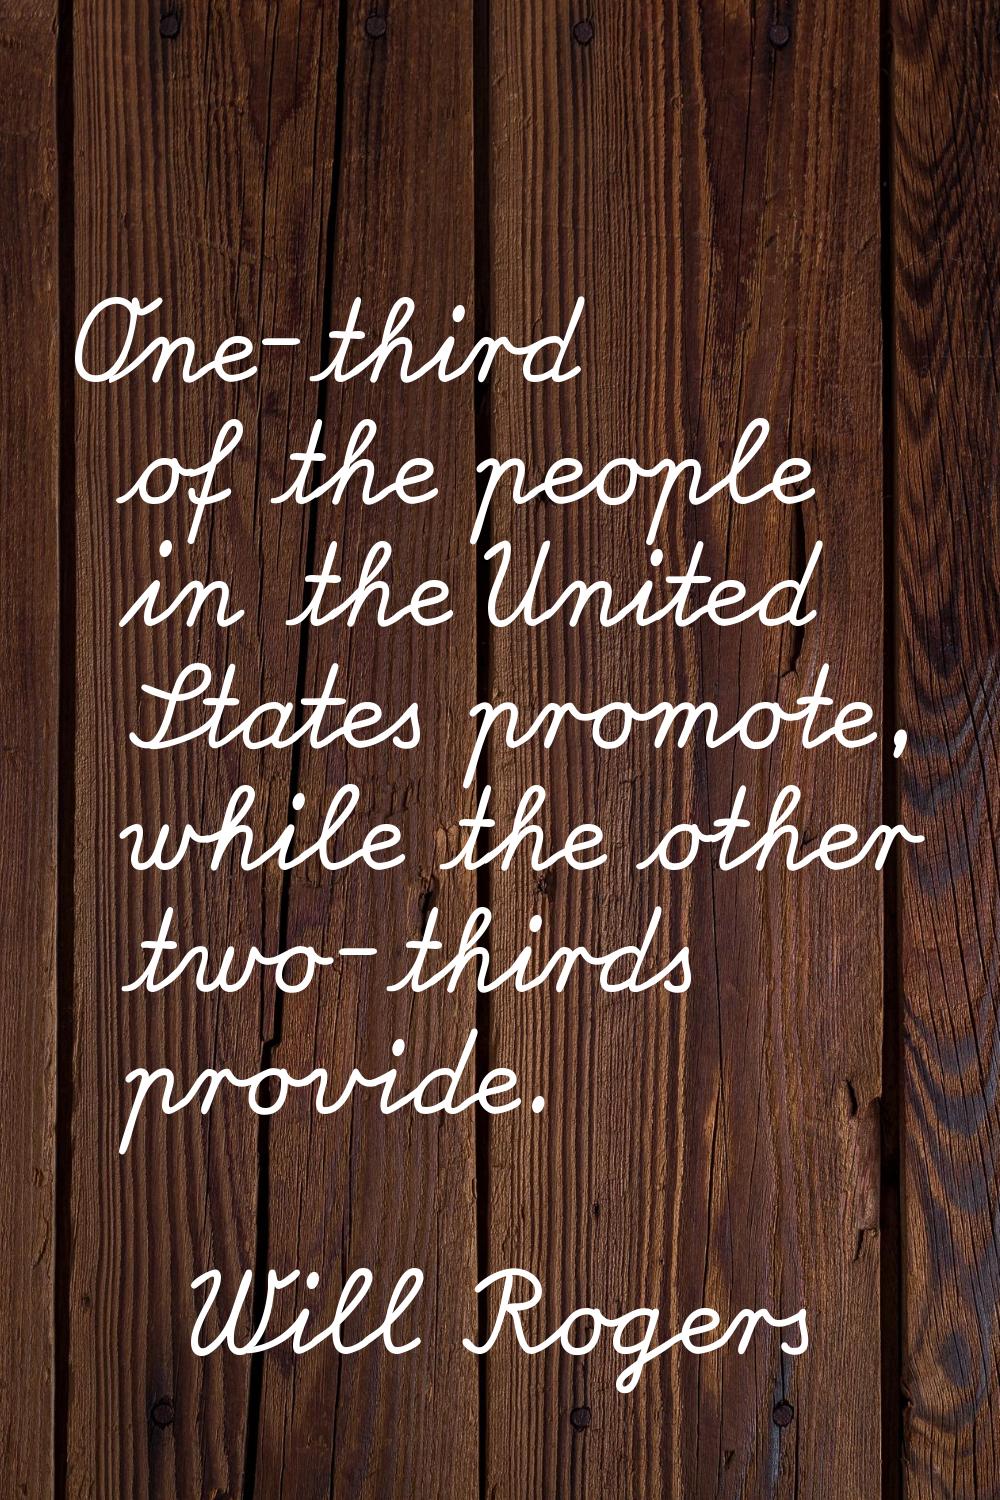 One-third of the people in the United States promote, while the other two-thirds provide.